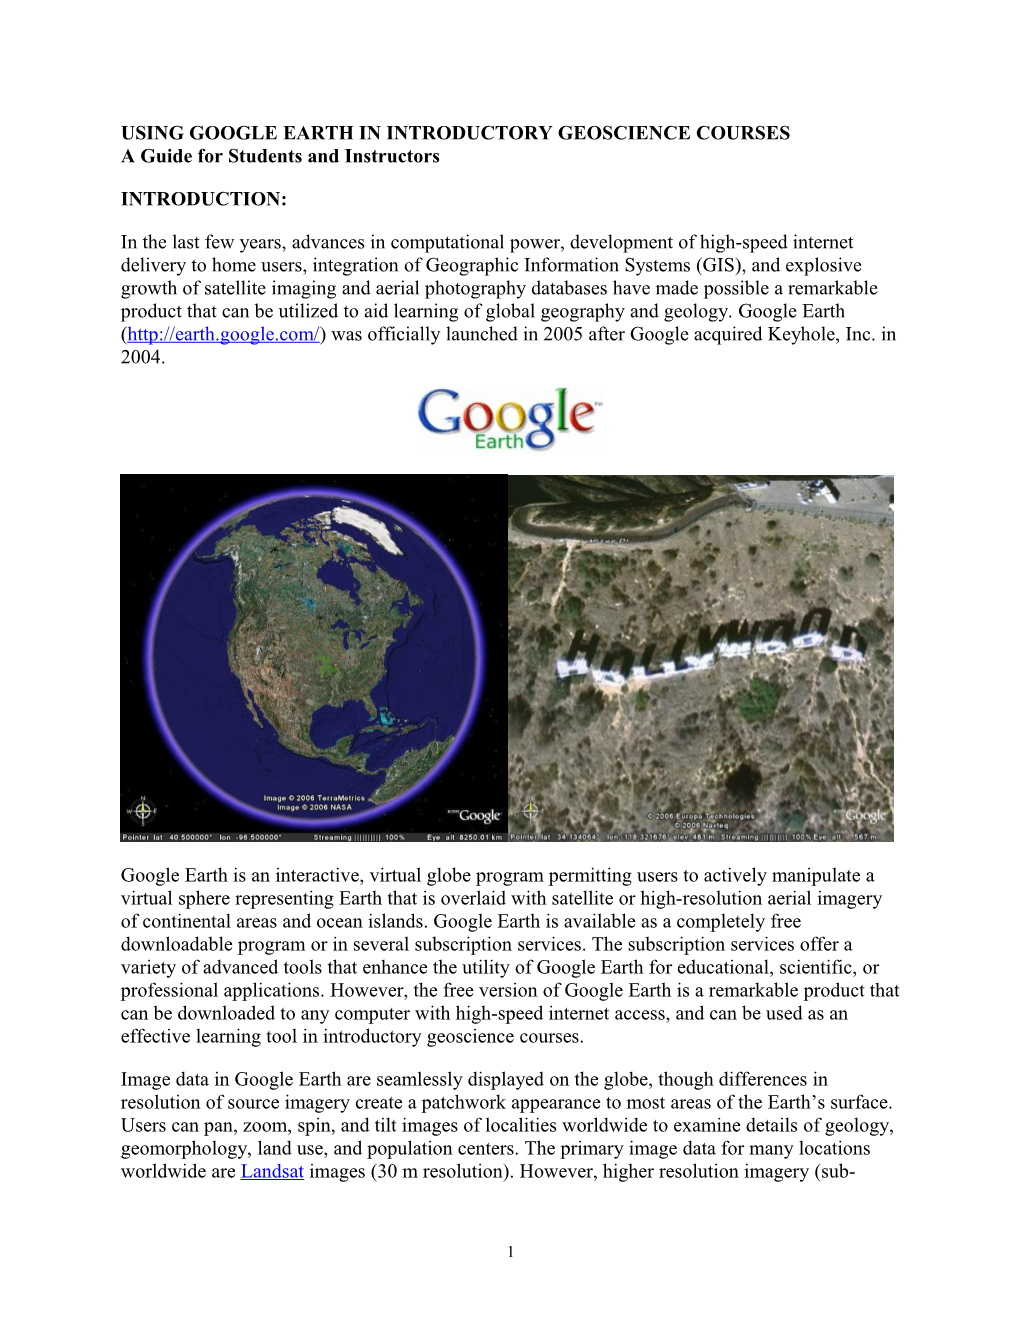 Using Google Earth in Introductory Geoscience Courses